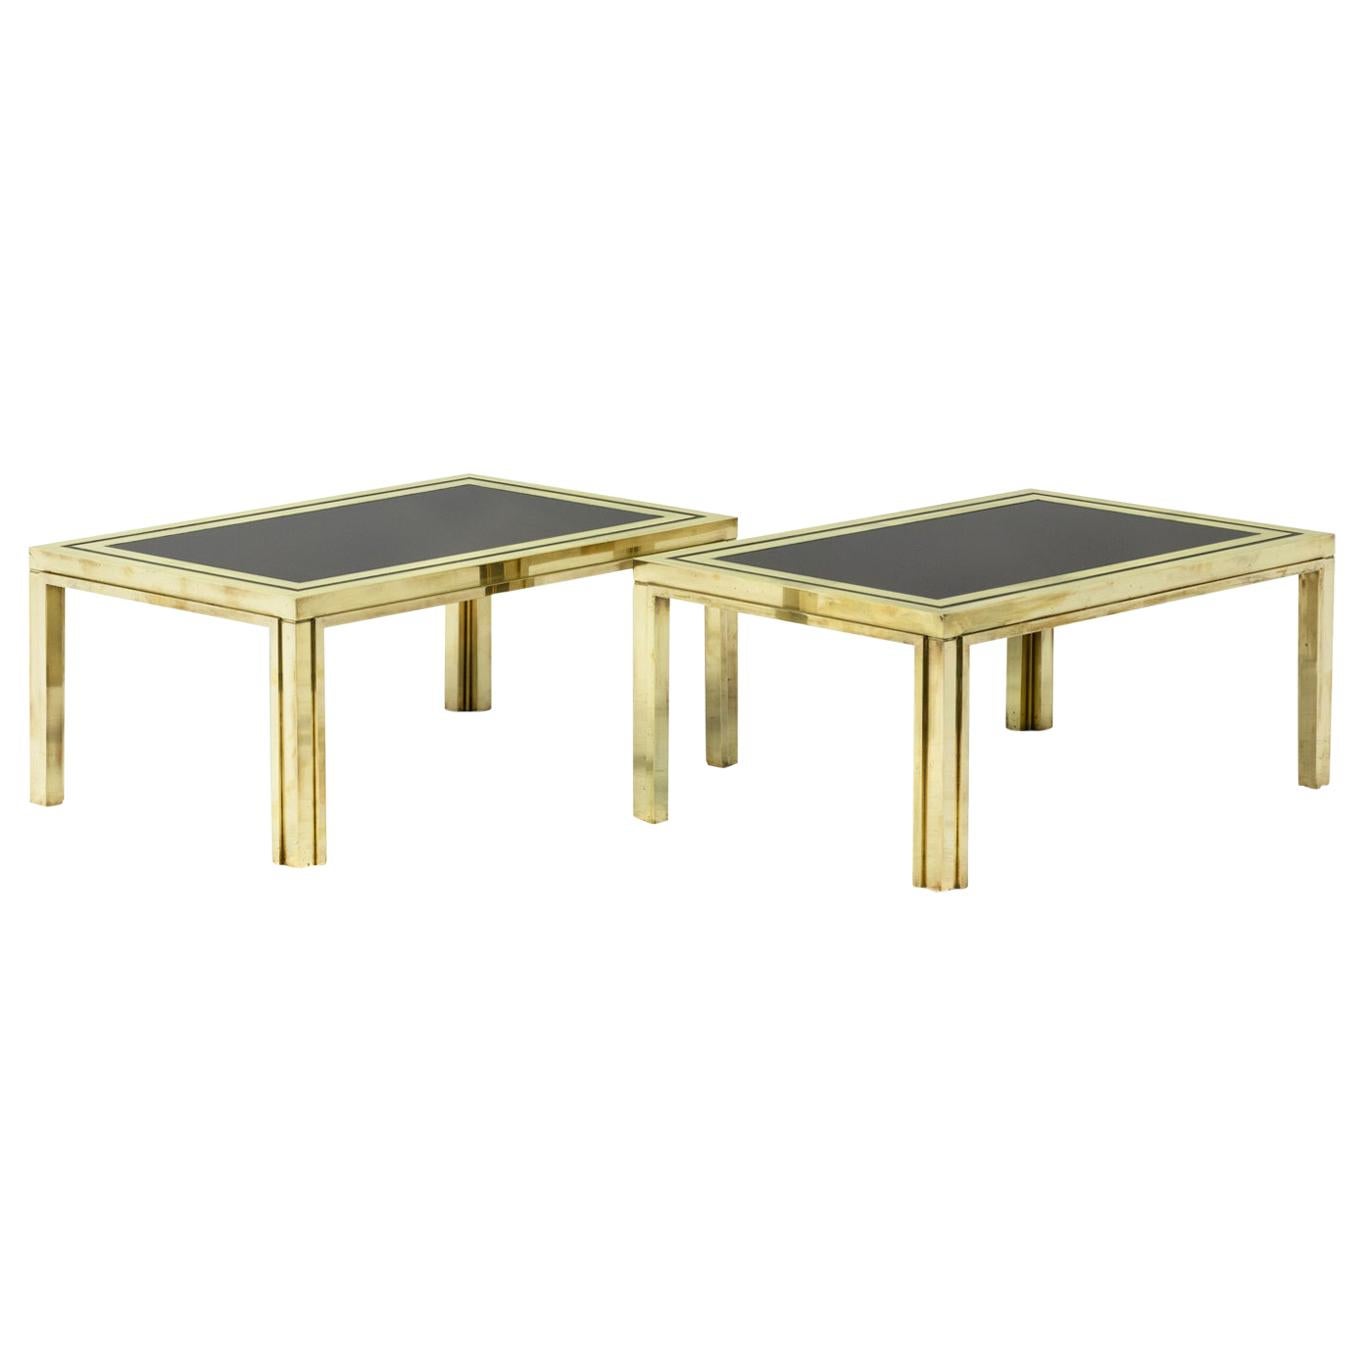 Maison Iiwans, Pair of End Tables in Gilt Brass, 1970’s For Sale